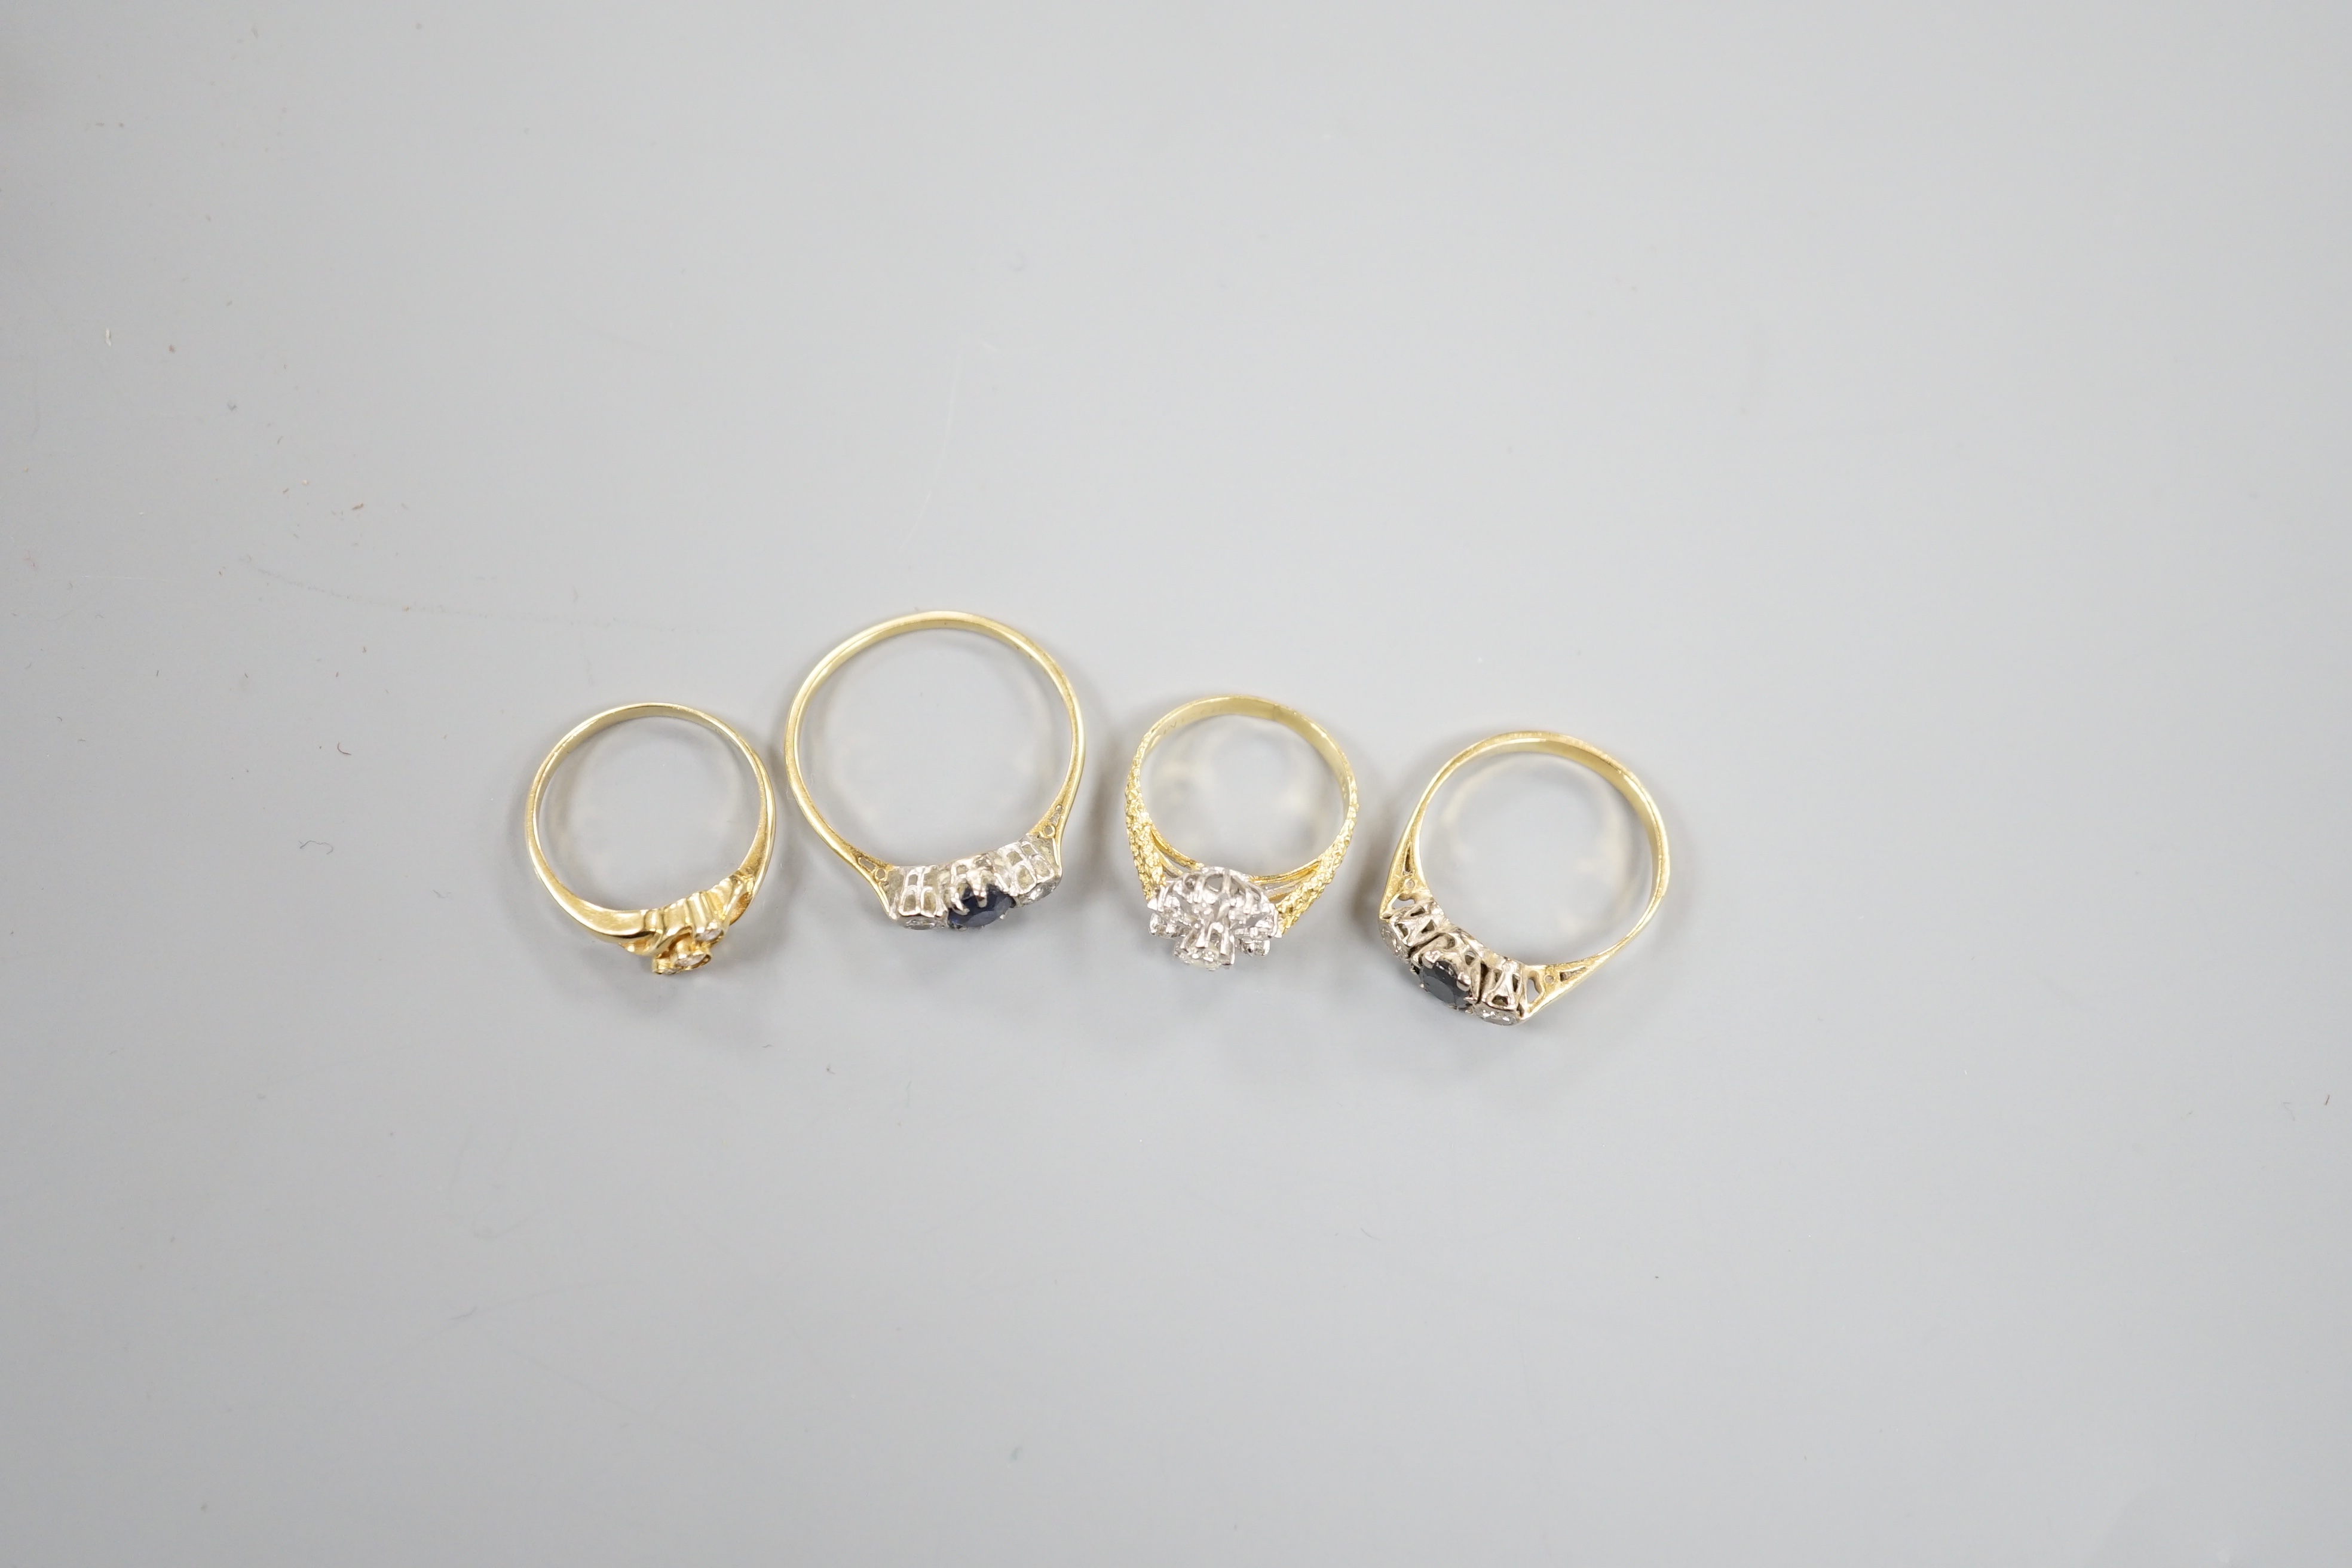 Two 18ct and gem set dress rings, including sapphire and diamond, gross 5.9 grams, a 585 crossover ring, gross 1.8 grams and a yellow metal, sapphire and diamond set ring, gross 3.1 grams.